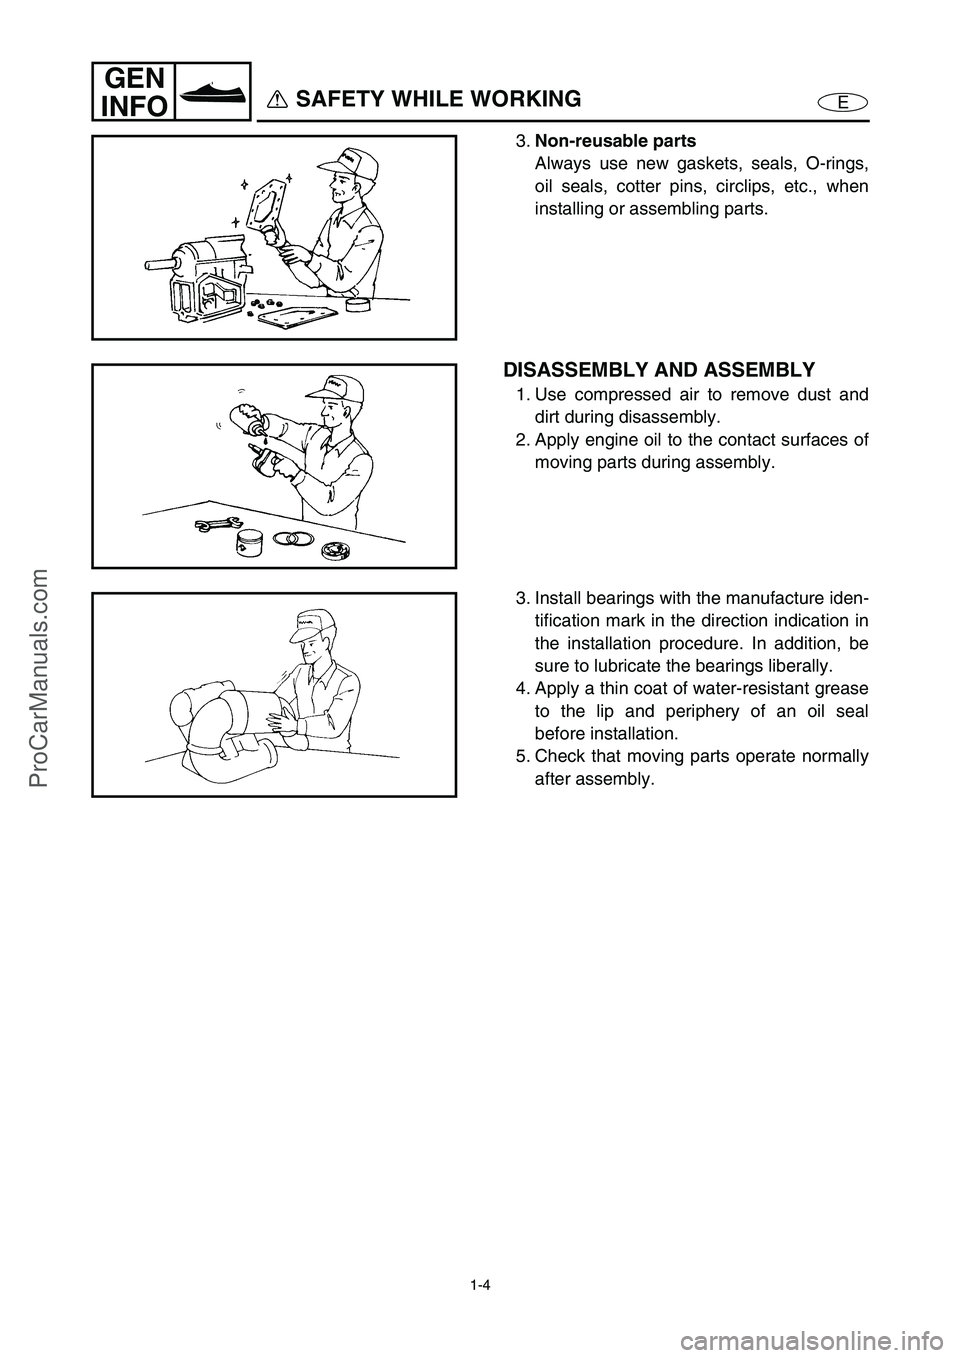 YAMAHA VX110 2005  Service Manual 1-4
E
GEN
INFO
 SAFETY WHILE WORKING
3.Non-reusable parts
Always use new gaskets, seals, O-rings,
oil seals, cotter pins, circlips, etc., when
installing or assembling parts.
DISASSEMBLY AND ASSEMBLY
